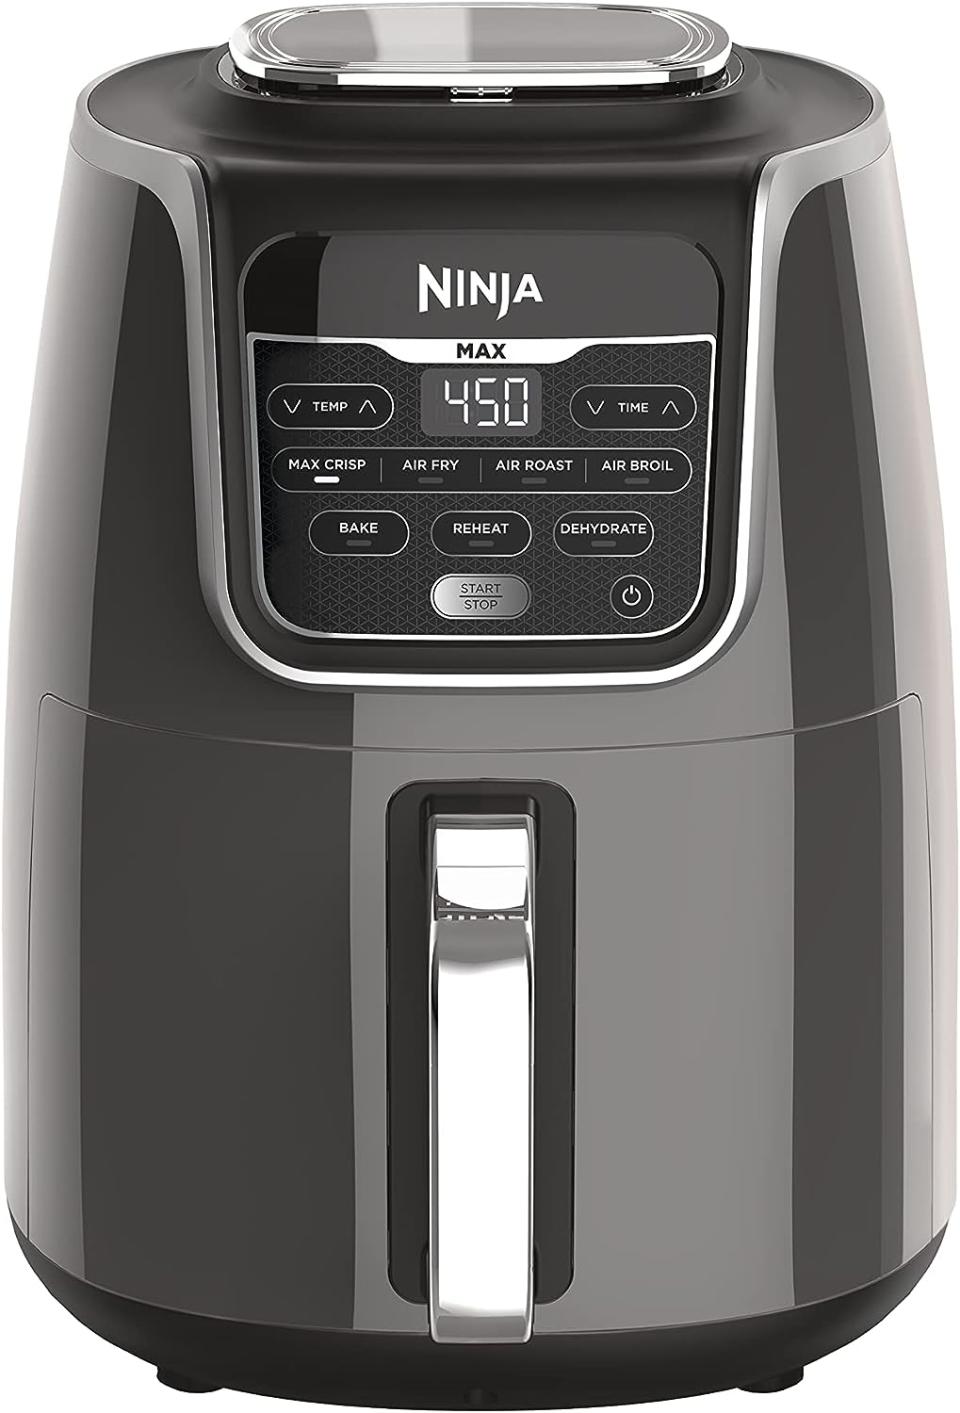 Save 40% on Amazon's Best-Selling Ninja Air Fryer Today